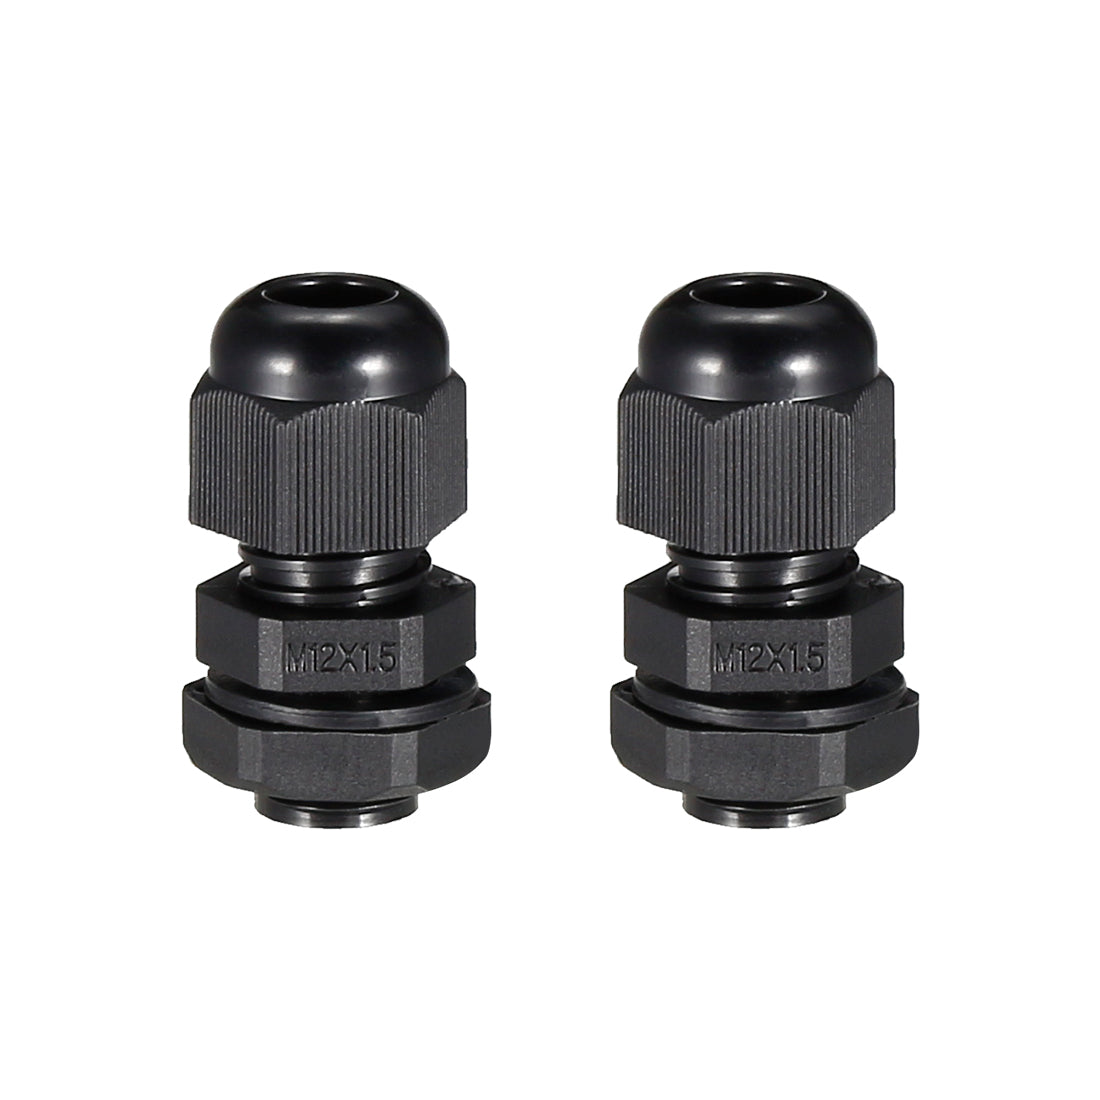 uxcell Uxcell M12 Cable Gland Waterproof Plastic Joint Adjustable Locknut Black for 3mm-6.5mm Dia Cable Wire 2 Pcs